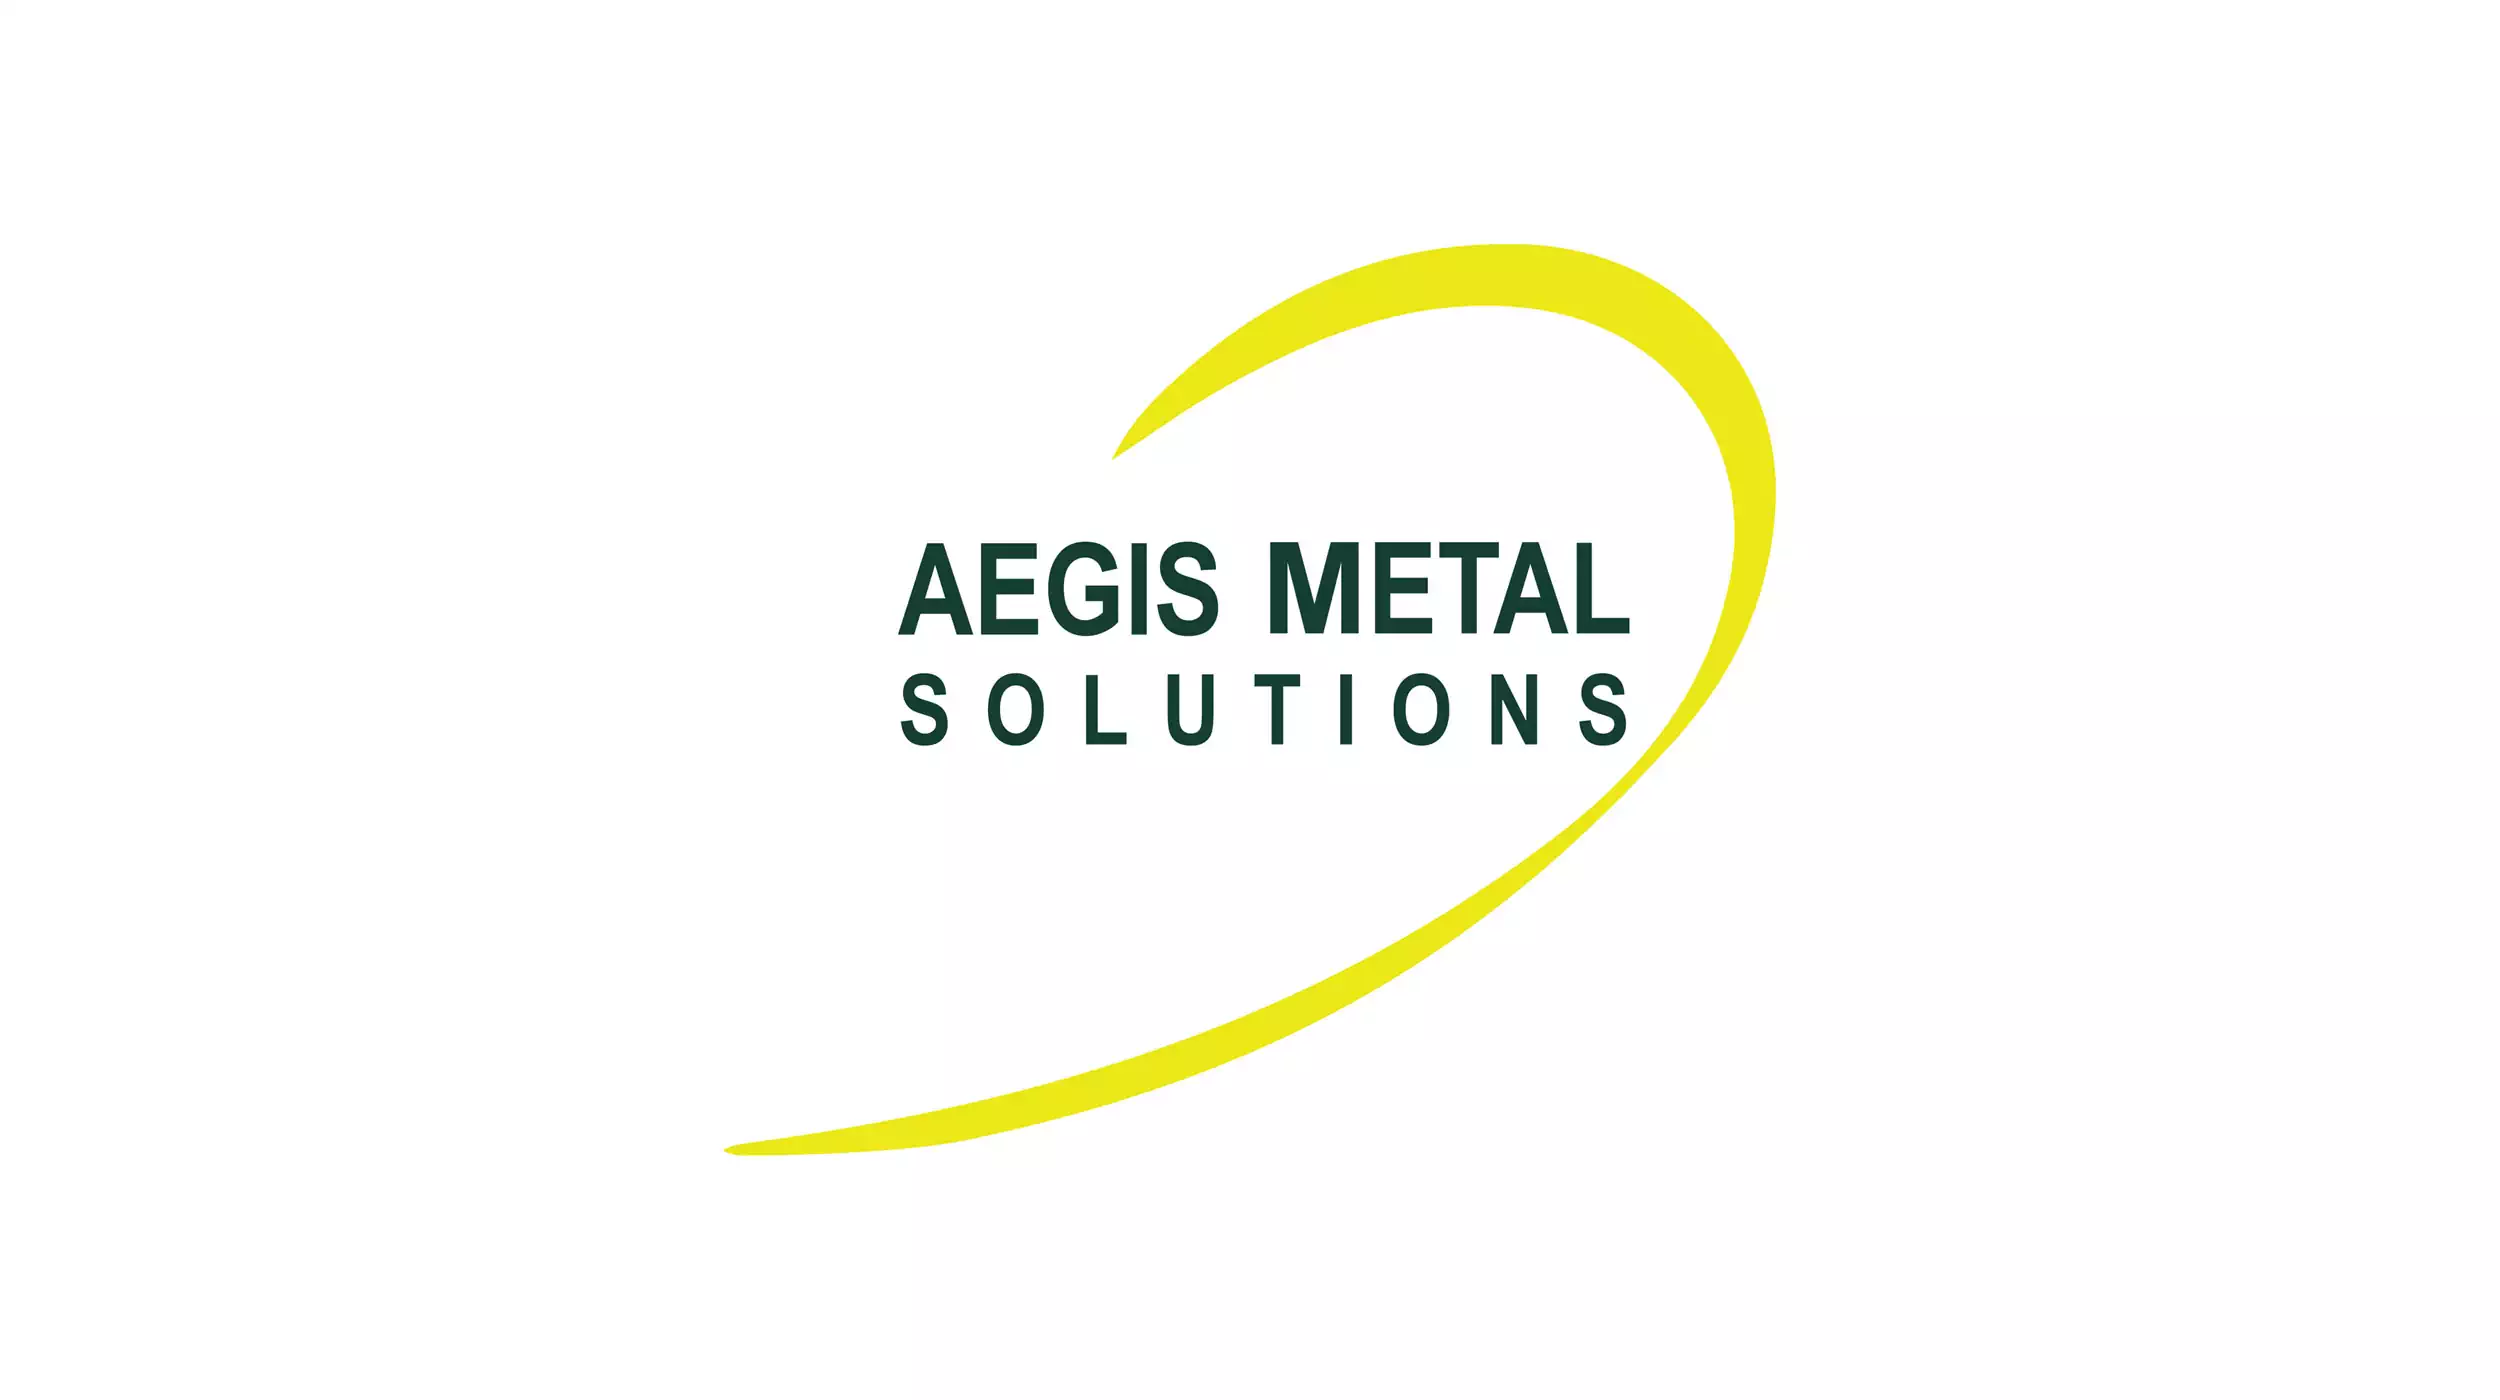 Aegis Metal Solutions Unveils New Name and Launches New Website